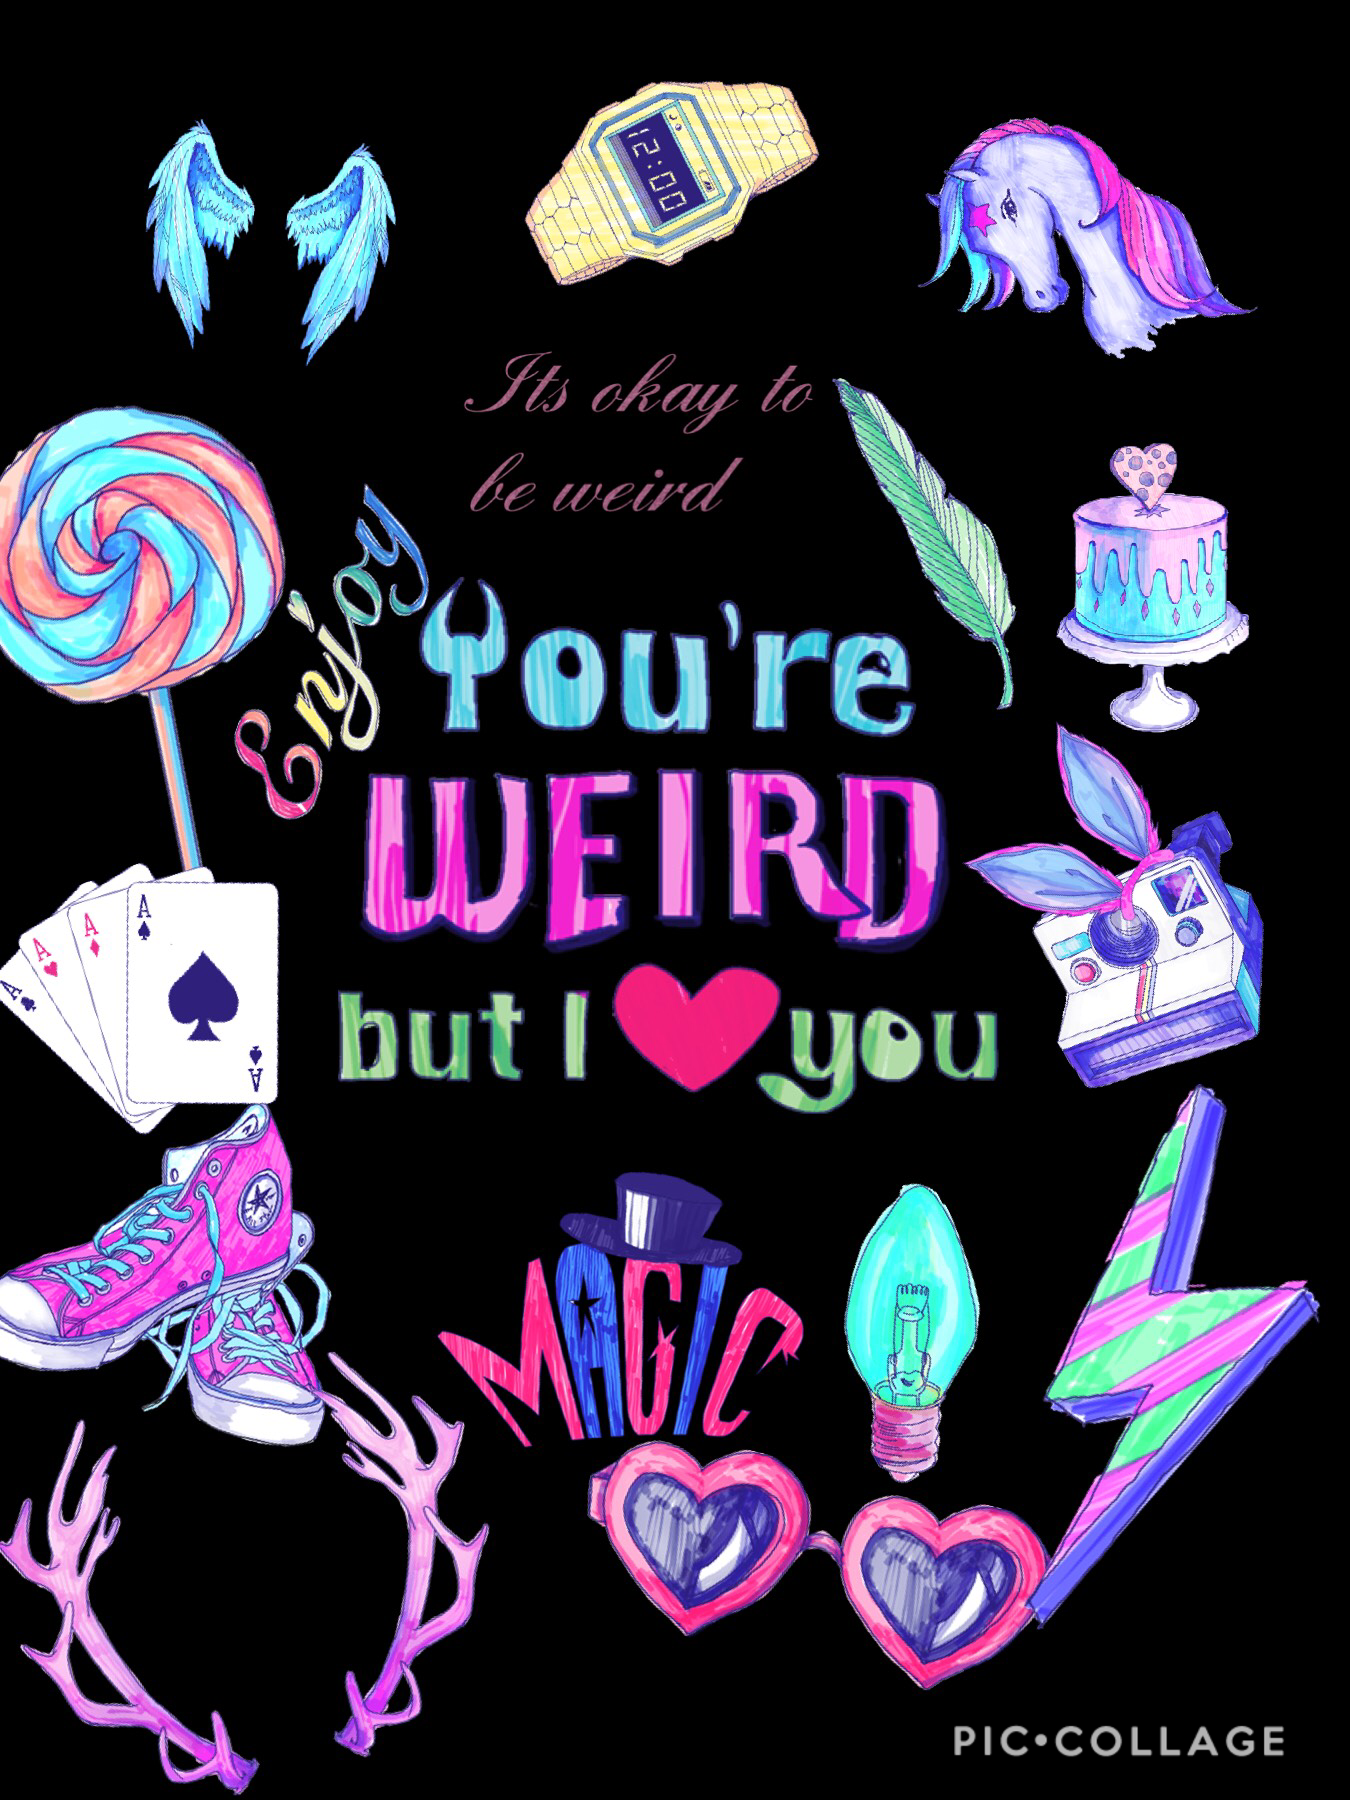 Its okay to be weird